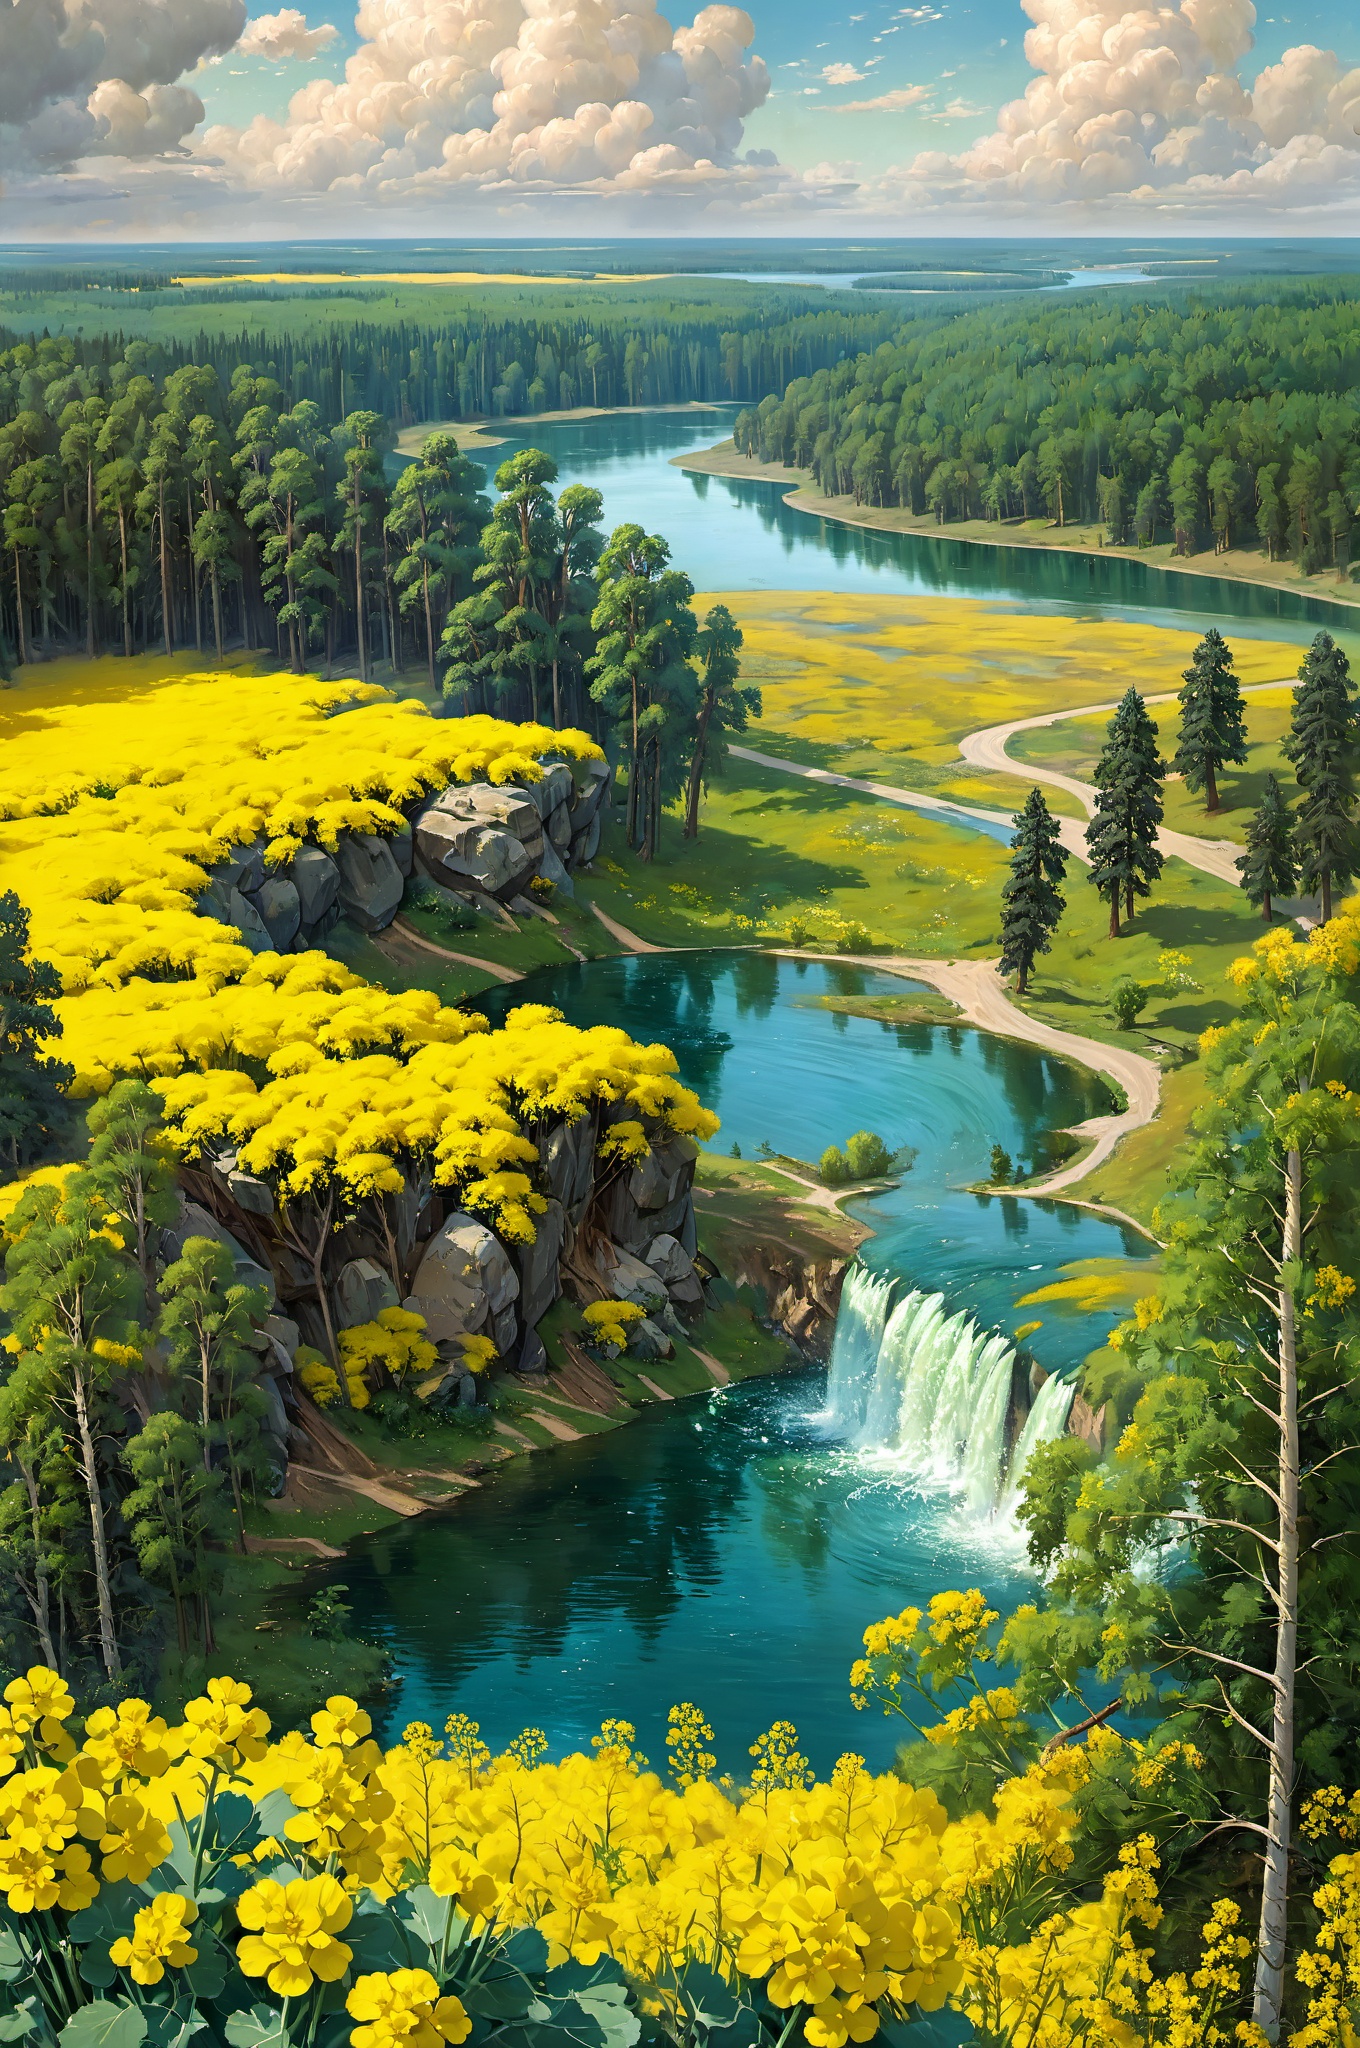 ((Canola flowers)),spring,ivan Shishkin,nature,trees,forest,water fall,sky,clouds,rock,lake,cloud,scenery,leafs,flowers,mountain at far,river,from above,countryside buildings at far,